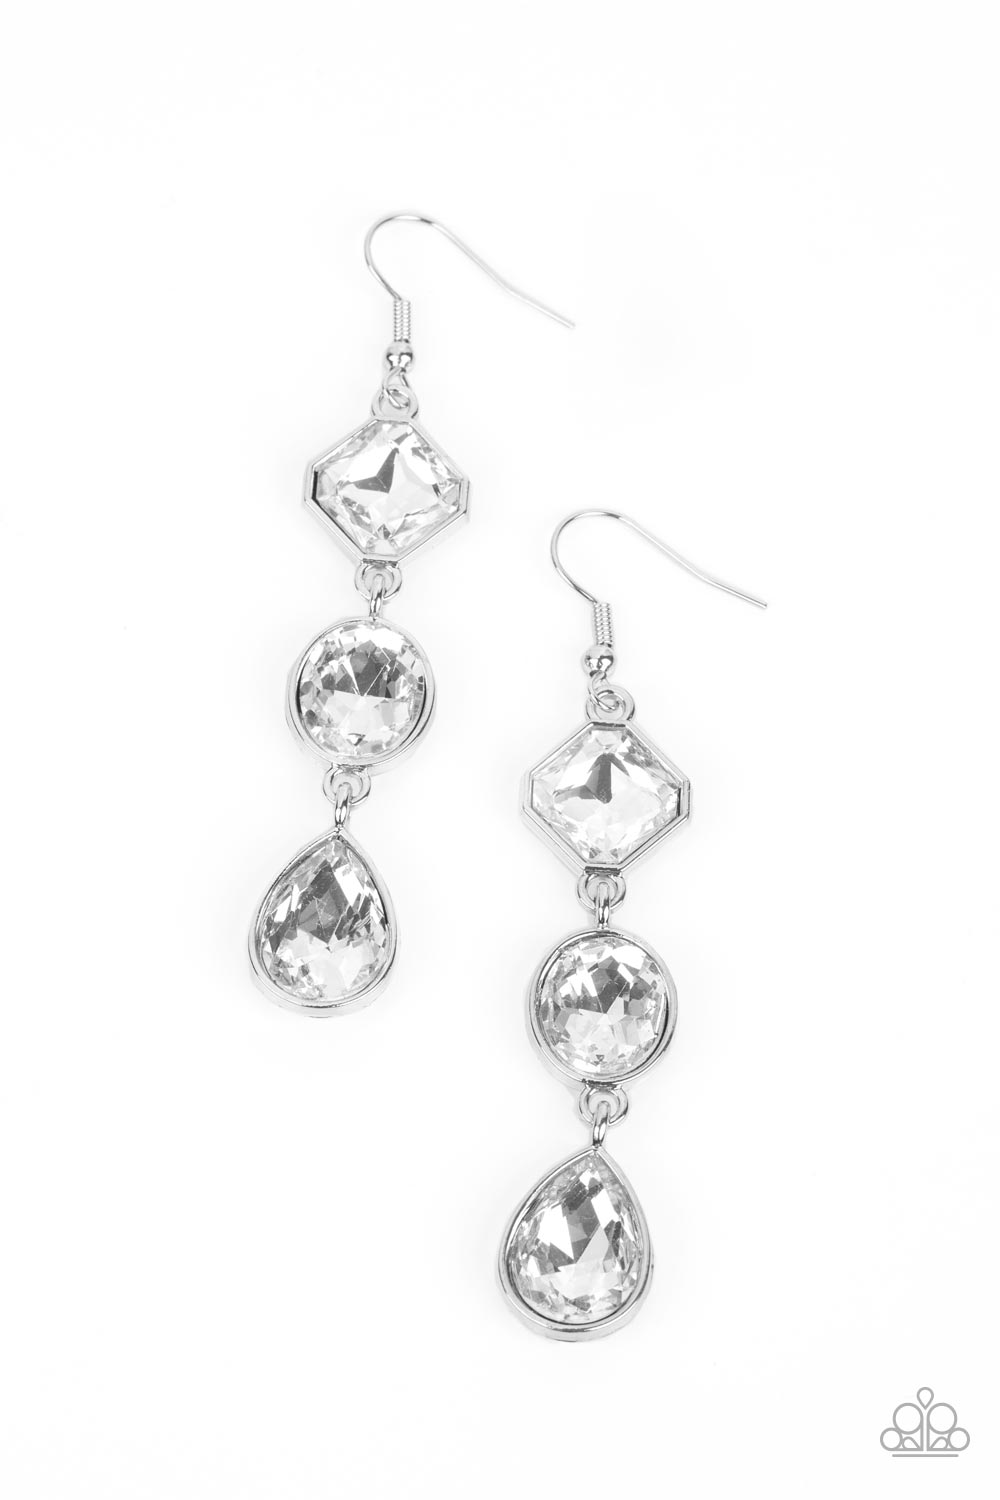 Reflective Rhinestones - White and Silver Earrings - Paparazzi Accessories